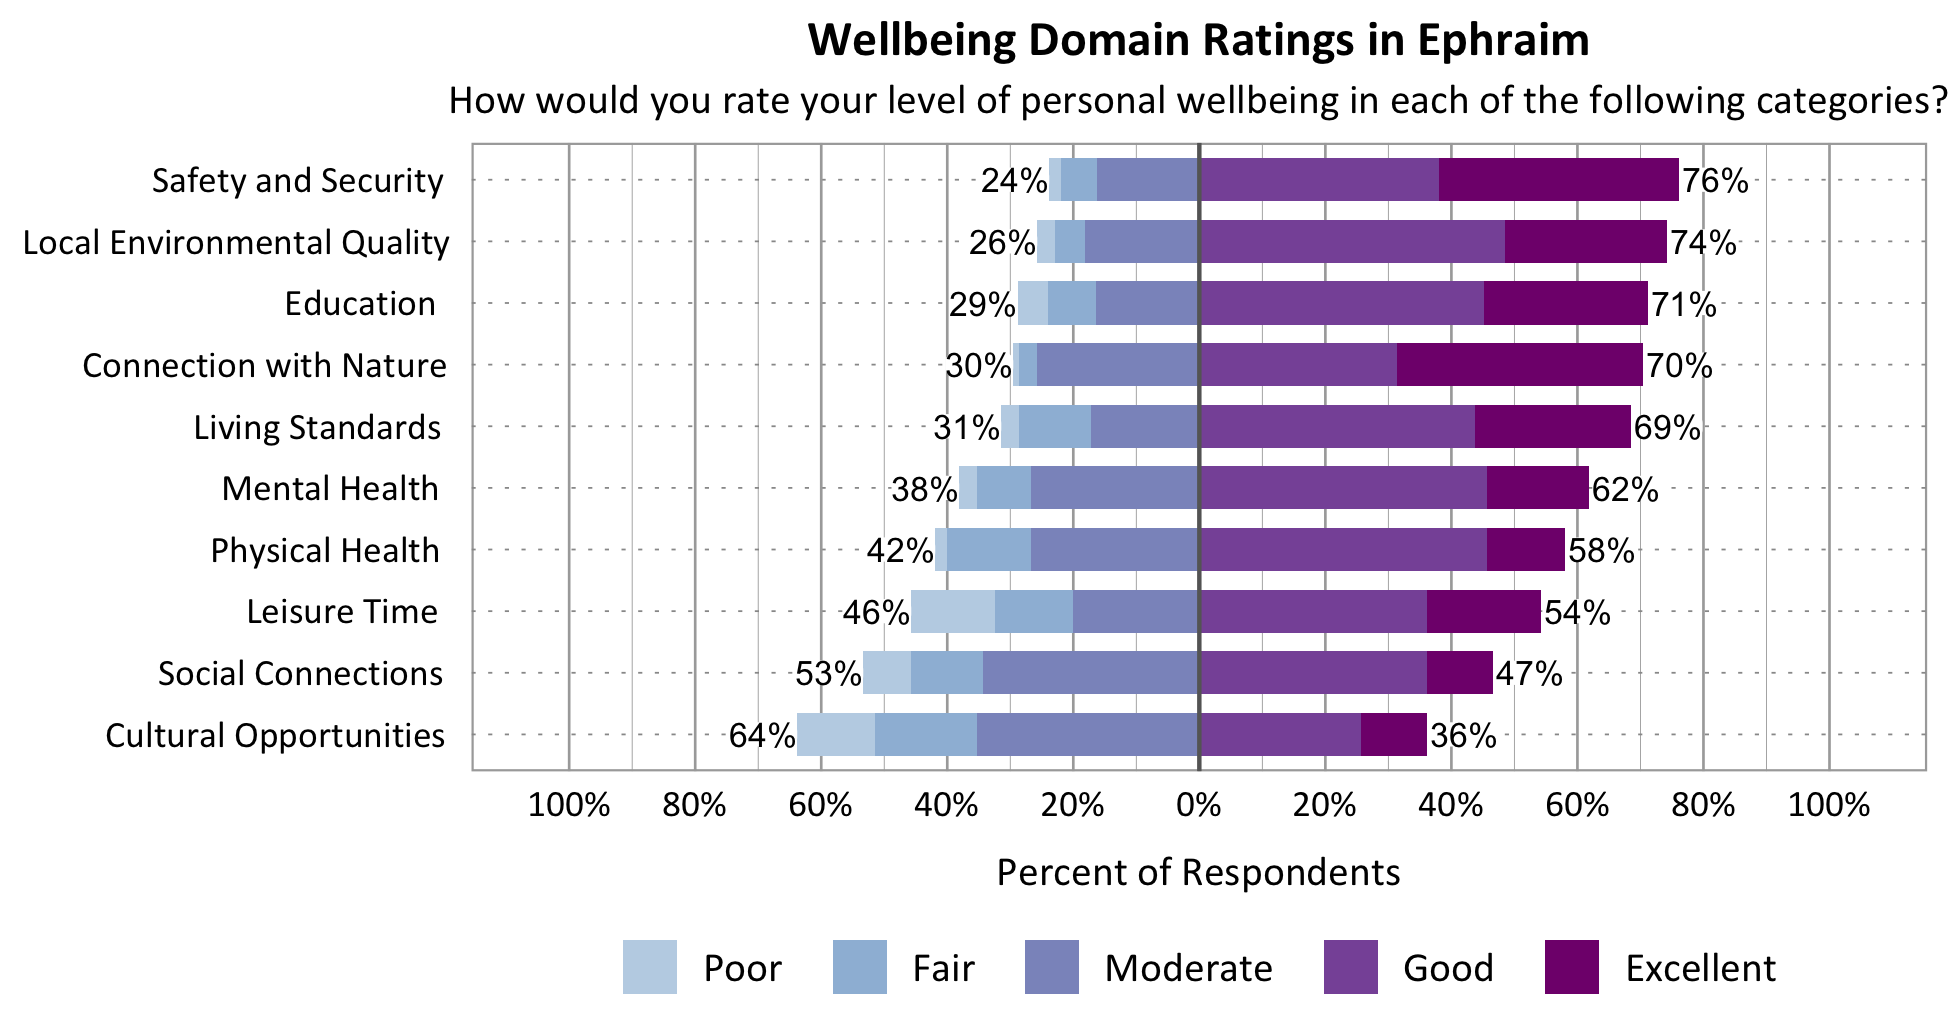 Likert Graph. Title: Wellbeing Domain Ratings in Ephraim. Subtitle: How would you rate your level of personal wellbeing in each of the following categories? Category: Safety and Security - 24% of respondents rated as poor, fair, or moderate while 76% rated as good or excellent; Category: Connection with Nature - 30% of respondents rated as poor, fair, or moderate while 70% rated as good or excellent; Category: Local Environmental Quality- 26% of respondents rated as poor, fair, or moderate while 74% rated as good or excellent; Category: Education - 29% of respondents rated as poor, fair, or moderate while 71% rated as good or excellent; Category: Living Standards - 31% of respondents rated as poor, fair, or moderate while 69% rated as good or excellent; Category: Mental Health - 38% of respondents rated as poor, fair, or moderate while 62% rated as good or excellent; Category: Leisure Time - 46% of respondents rated as poor, fair or moderate while 54% rated as good or excellent; Category: Physical Health - 42% of respondents rated as poor, fair, or moderate while 58% rated as good or excellent; Category: Social Connections - 53% of respondents rated as poor, fair, or moderate while 47% rated as good or excellent; Category: Cultural Opportunities - 64% of respondents rated as poor, fair or moderate while 36% rated as good or excellent.